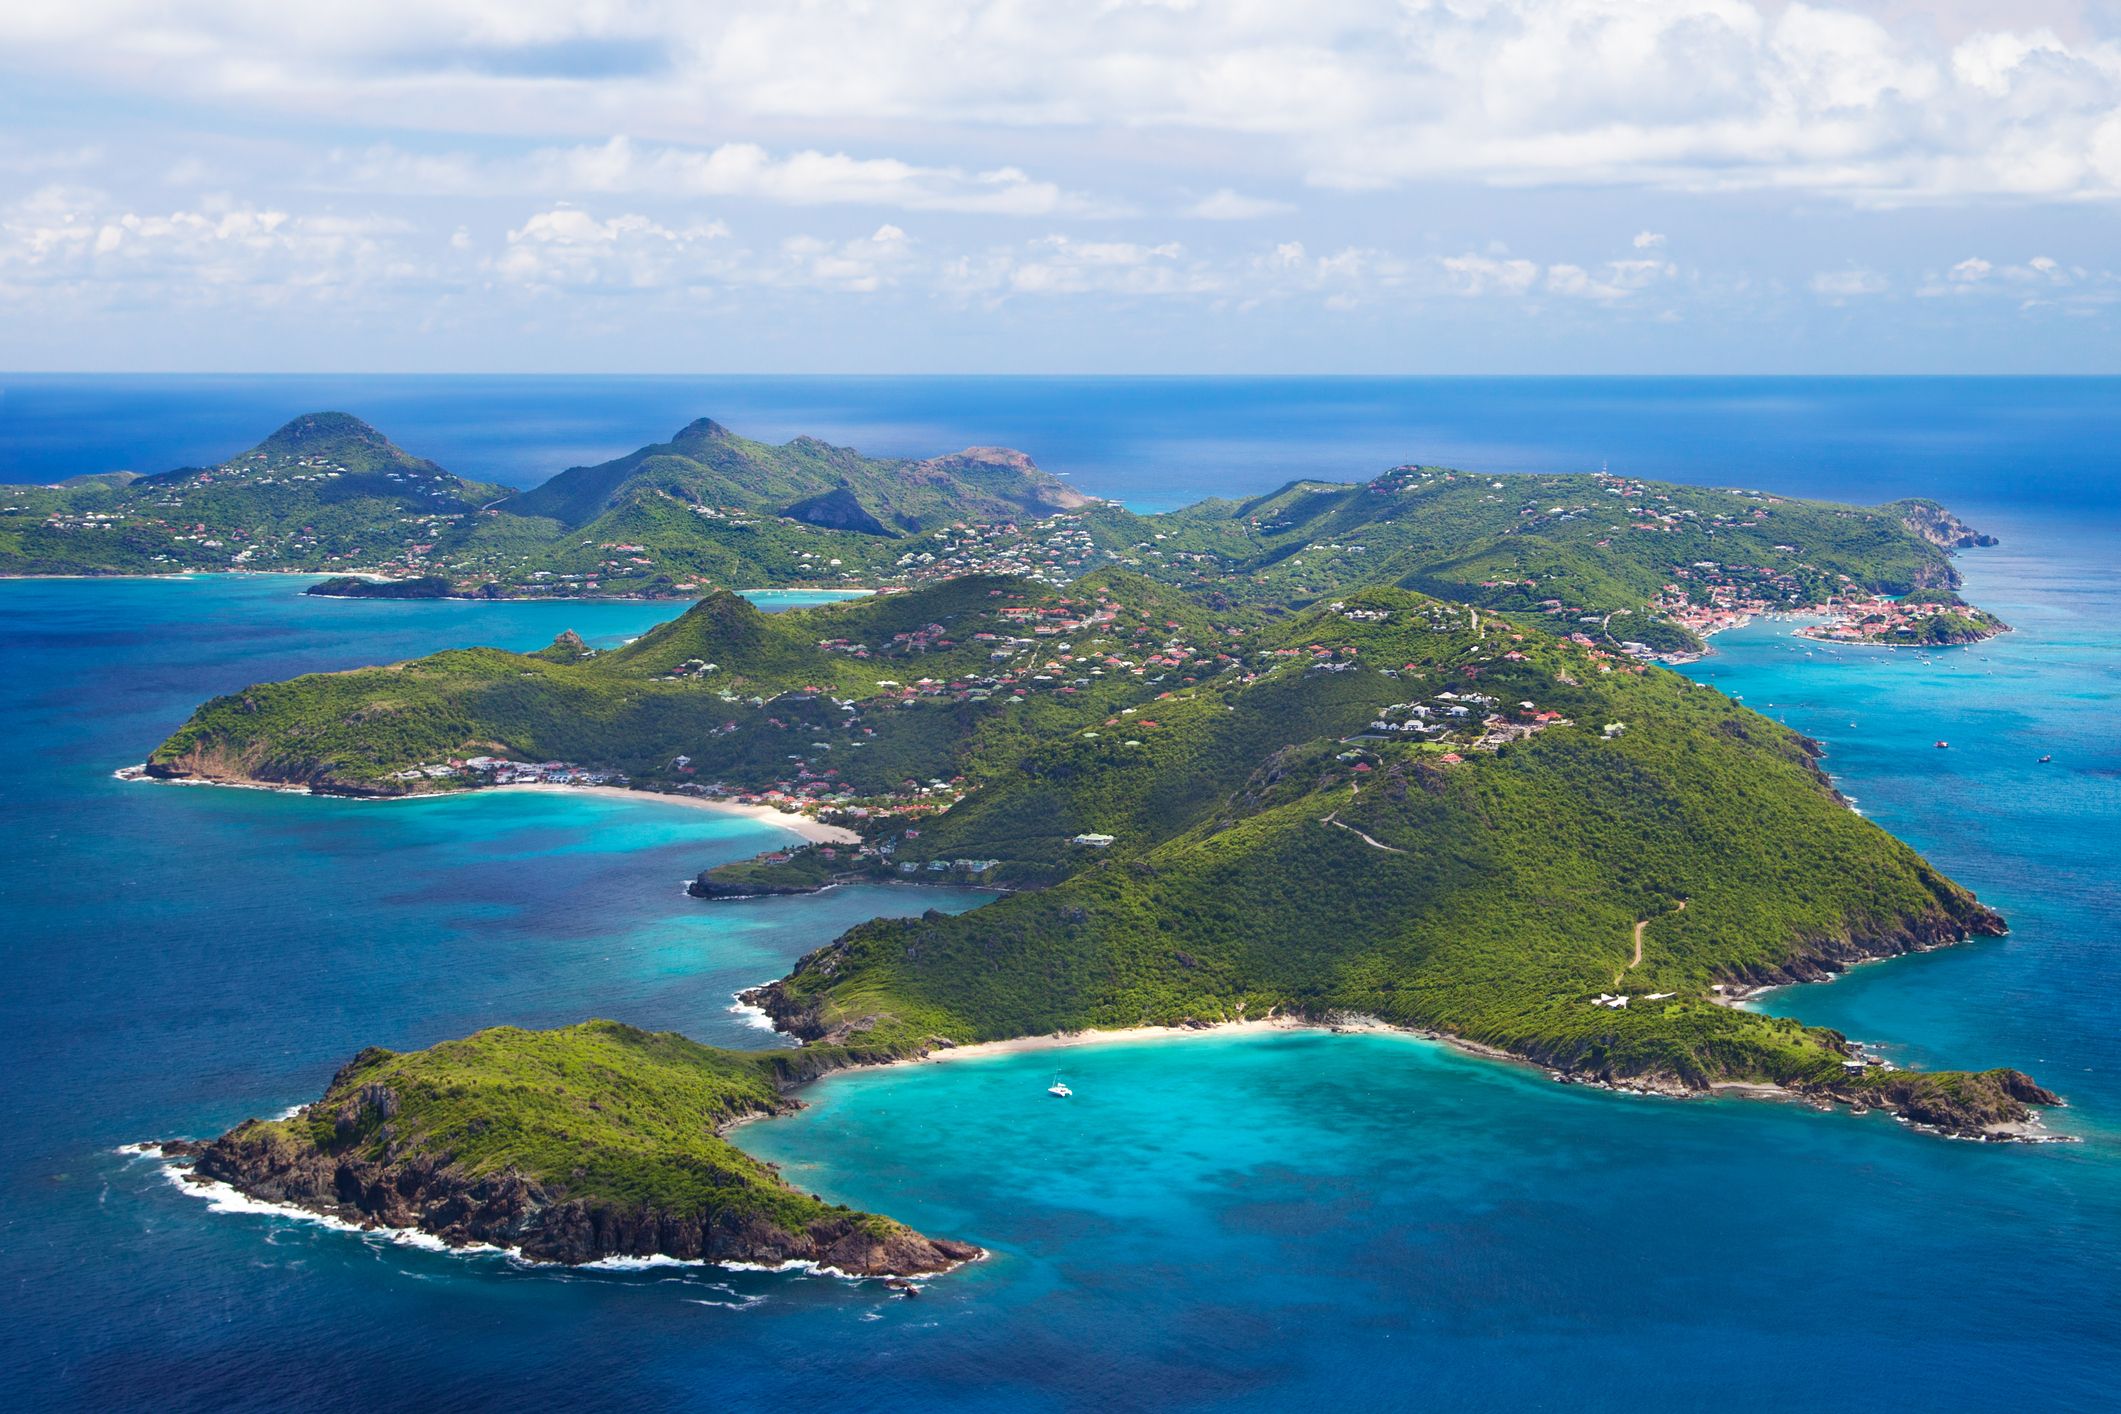 Flights to St Barths SBH - Private Jet Charter